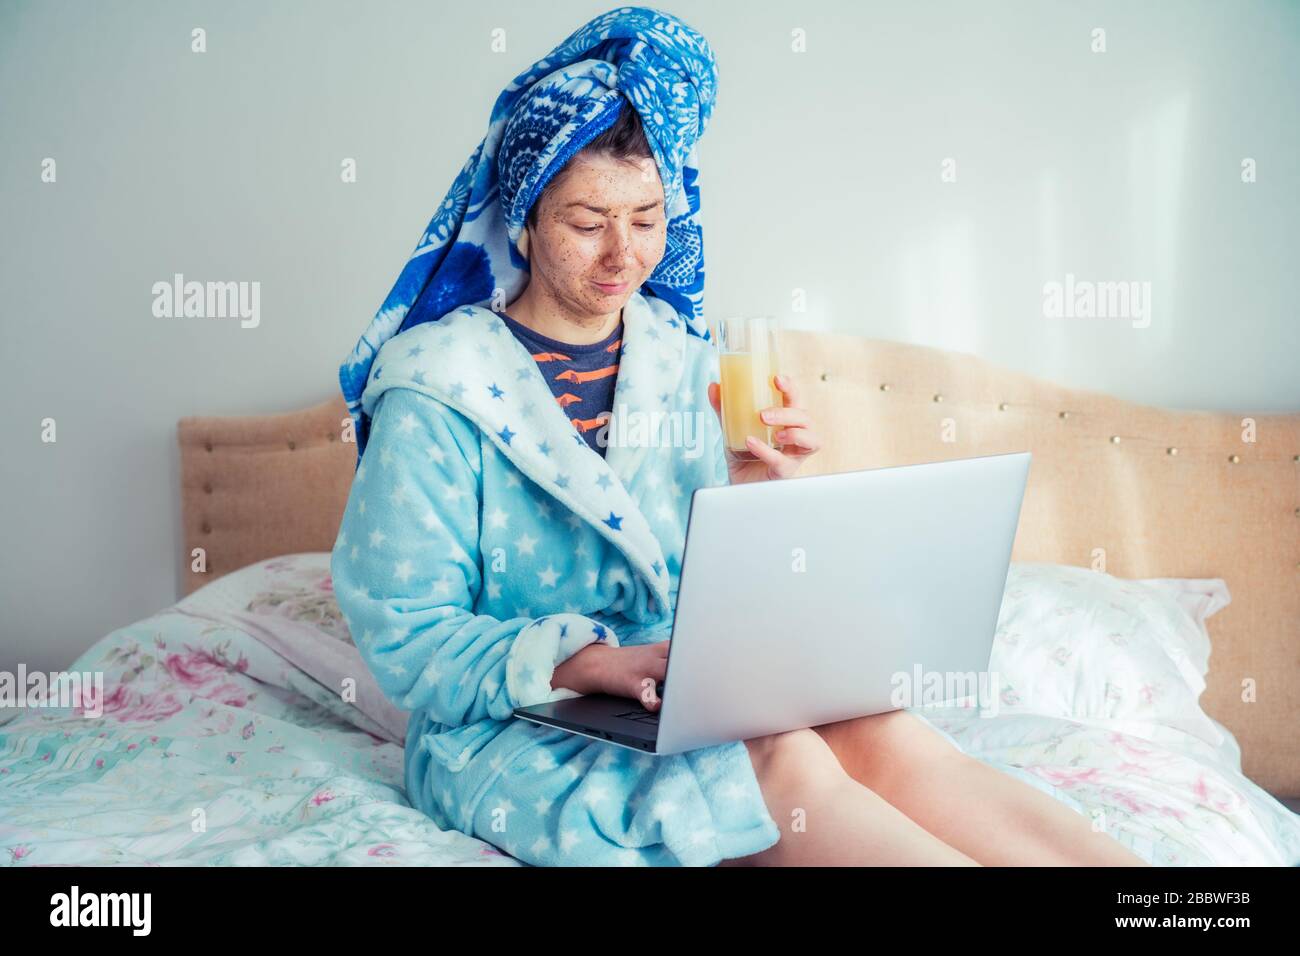 Portrait of a woman in a bathrobe and with a towel on her head, applying a scrubbing mask on her face while using a laptop, sitting on the bed. Lifest Stock Photo